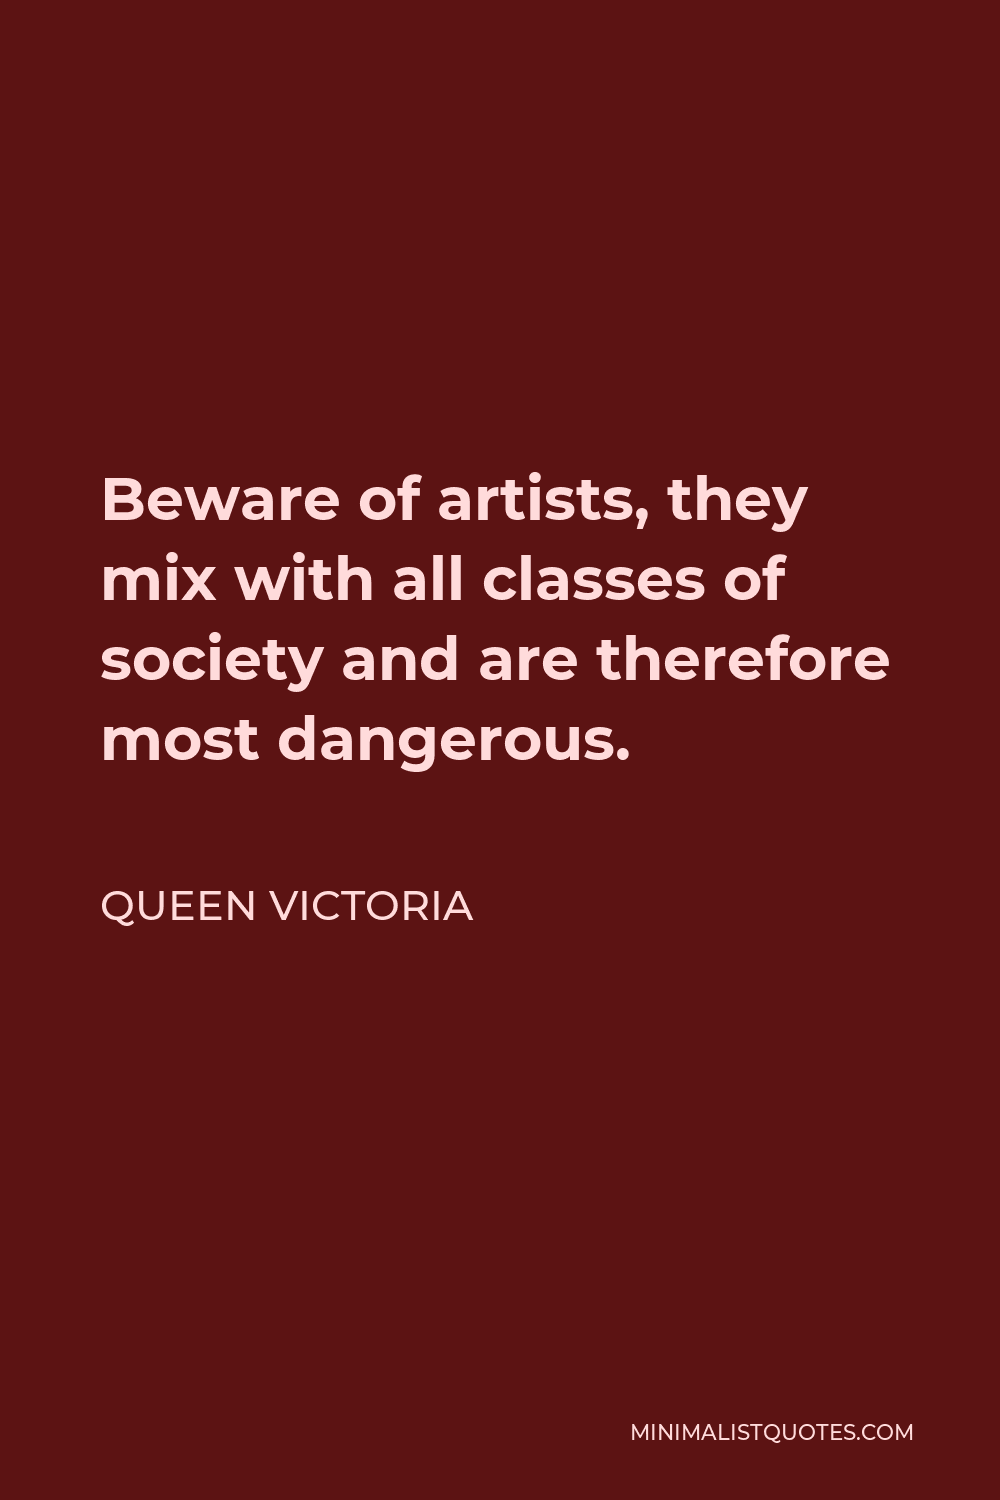 Queen Victoria Quote - Beware of artists, they mix with all classes of society and are therefore most dangerous.